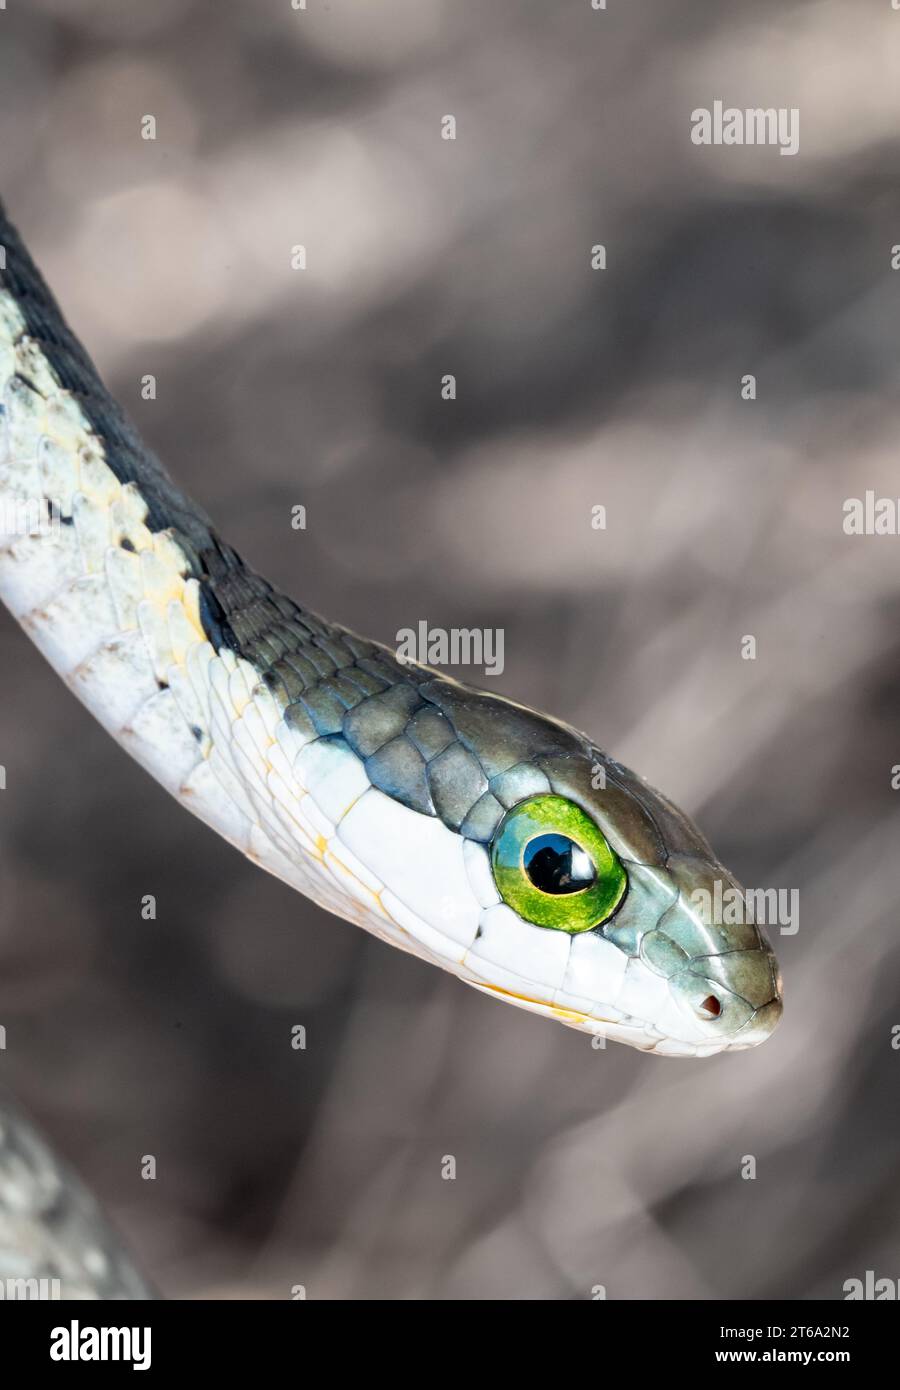 A green-eyed snake looking curiously at something in its proximity Stock Photo